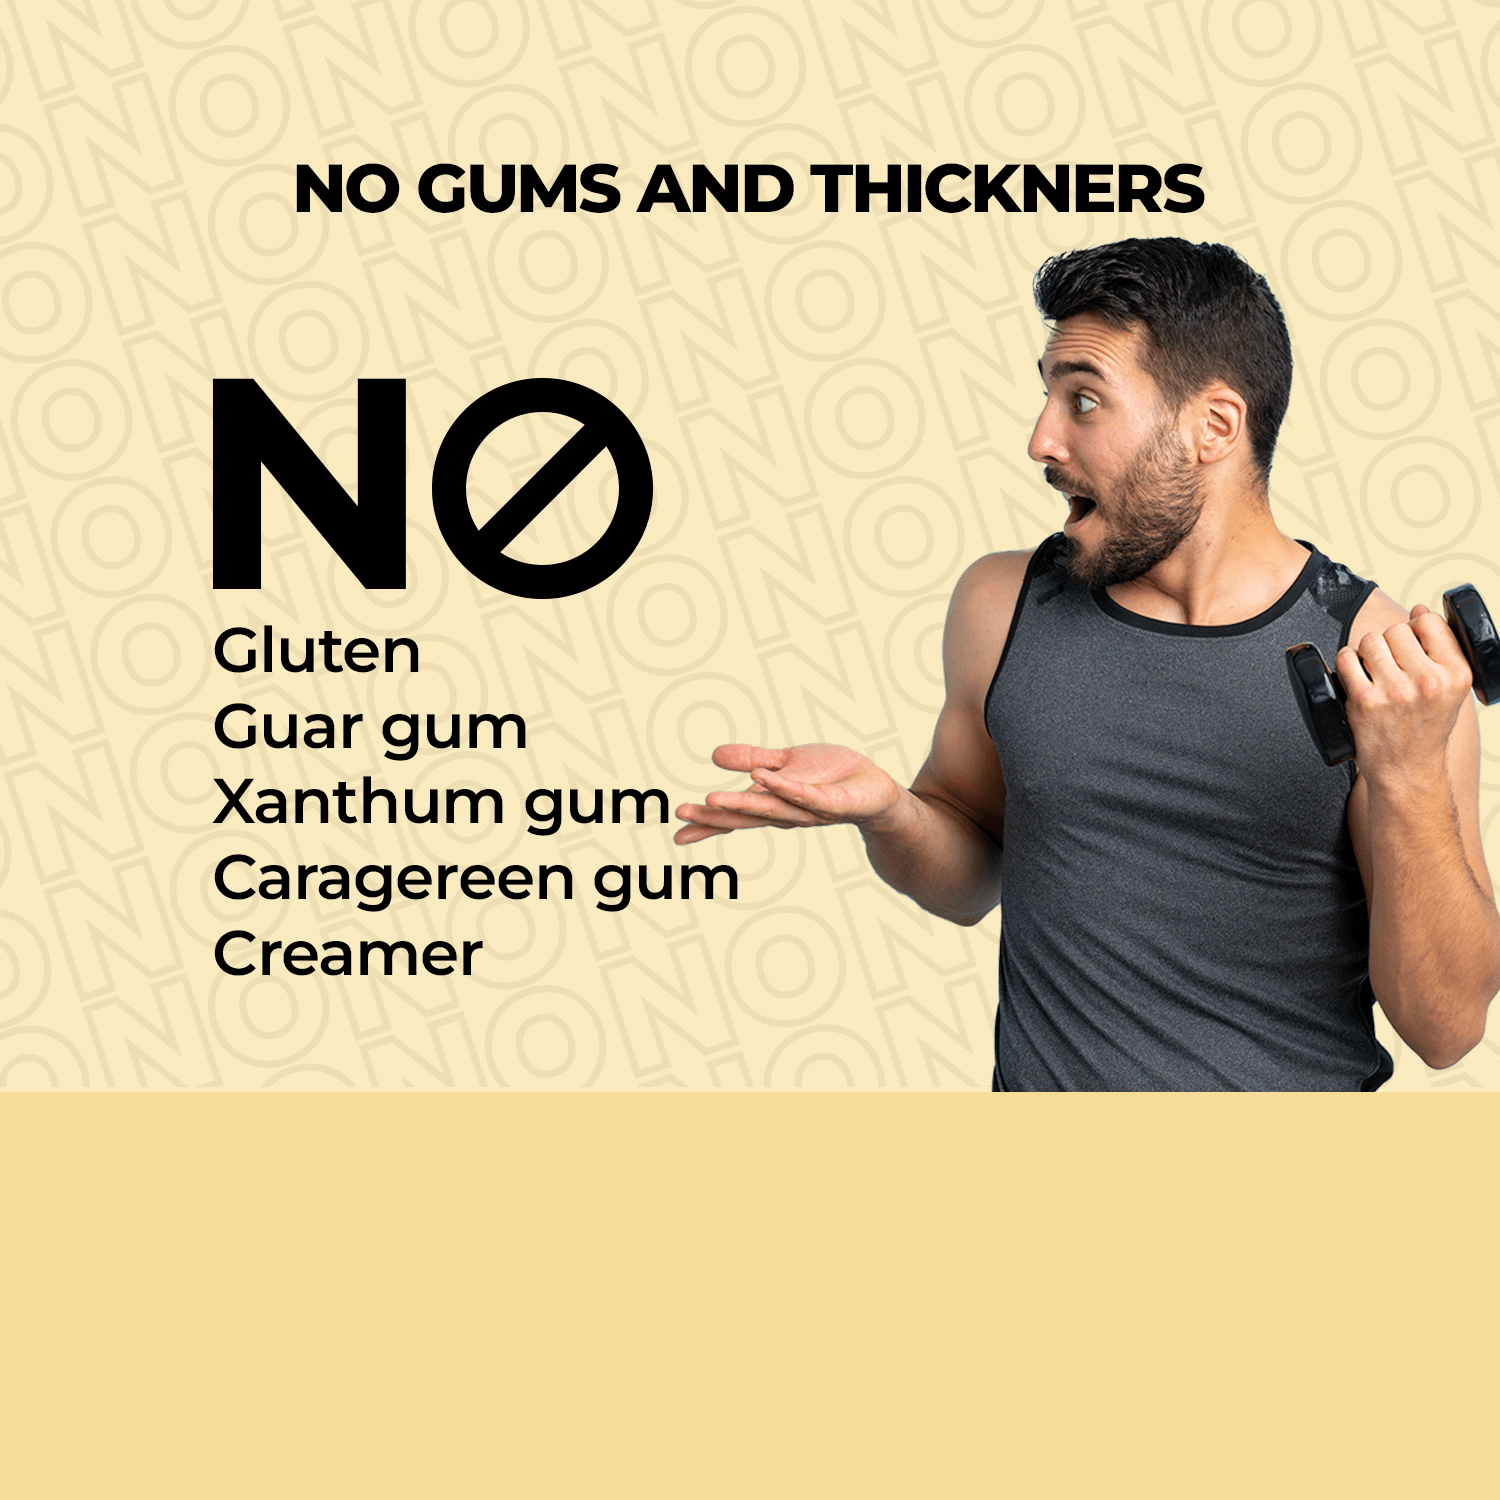 No Gums and Thickeners